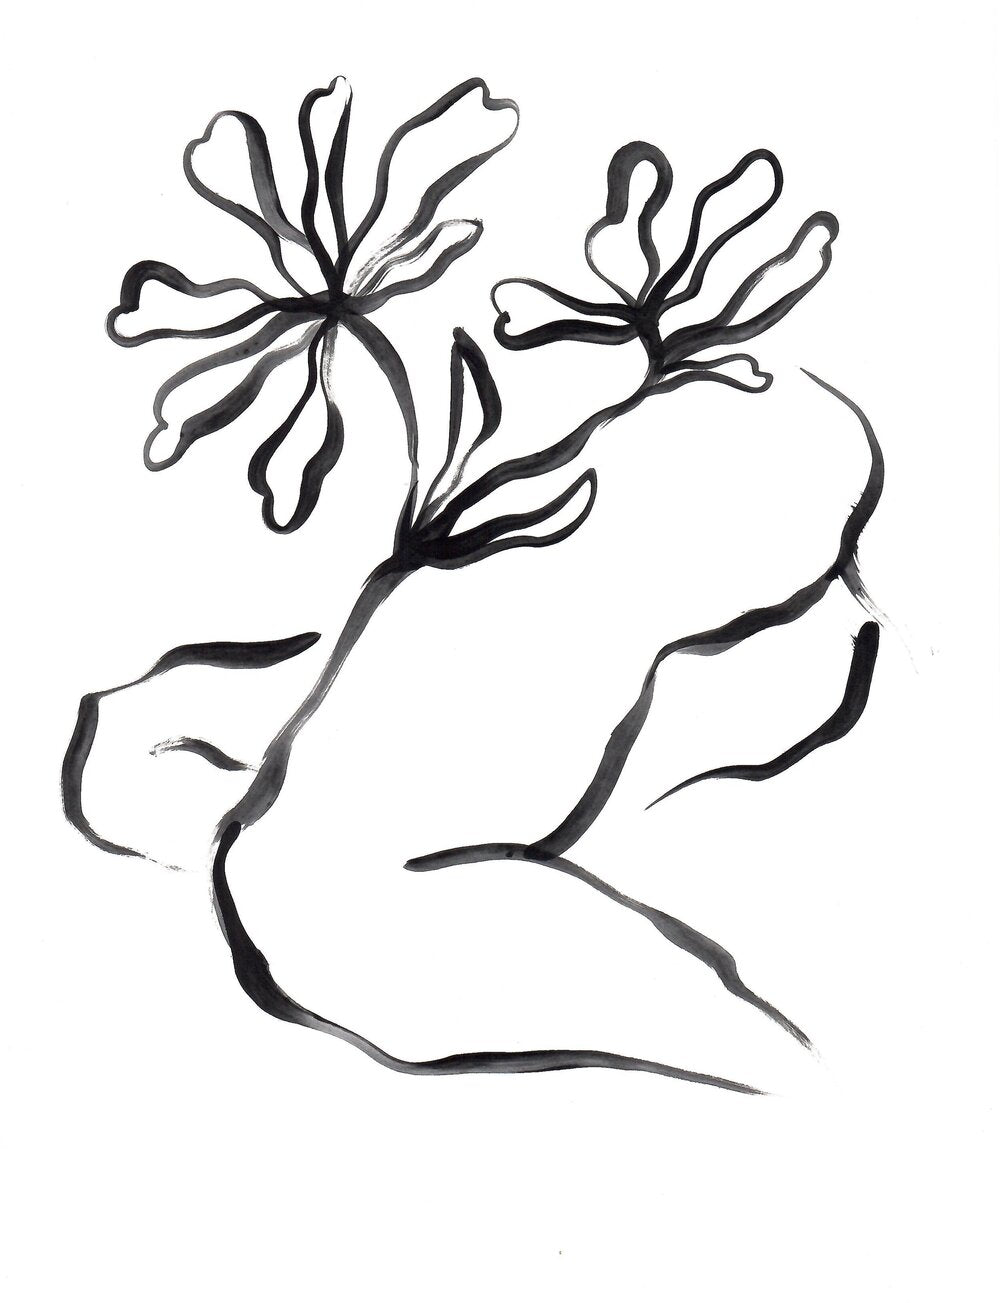 Minimalist black and white figure artwork with flowers 